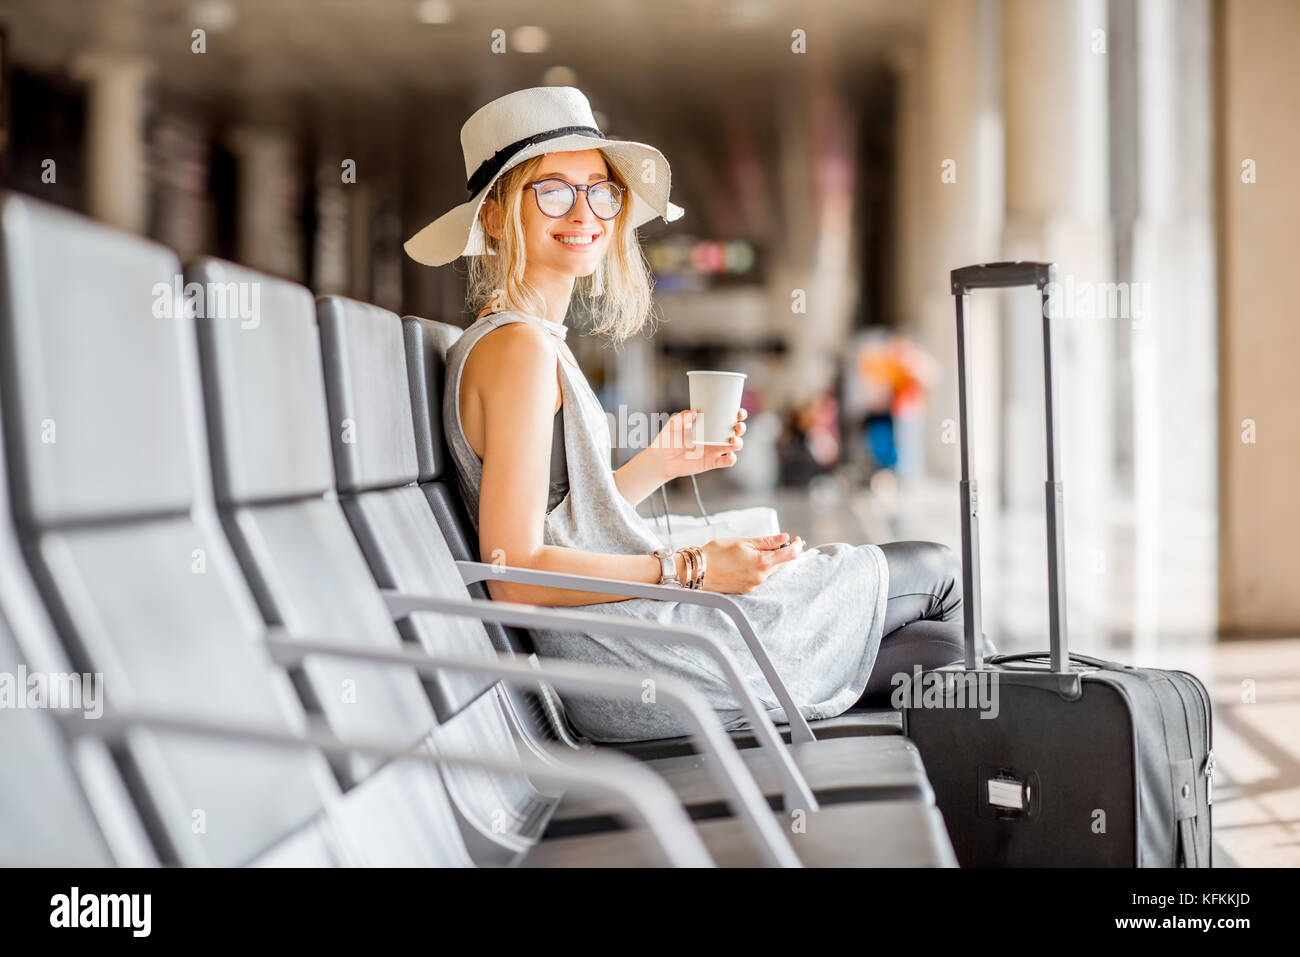 Woman at the airport Stock Photo